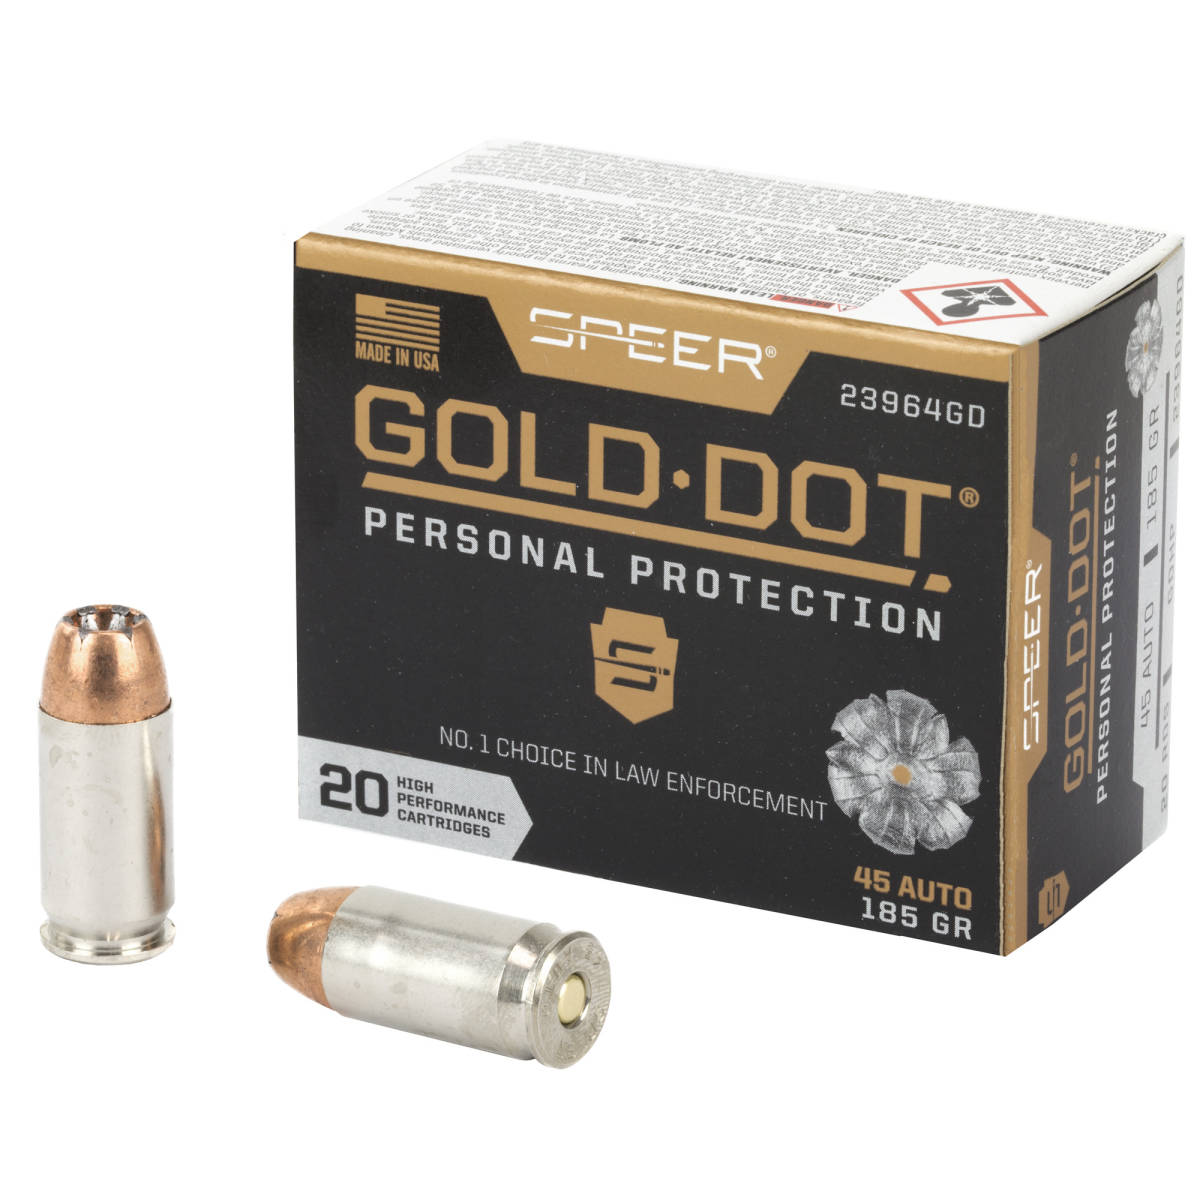 Speer 23964GD Gold Dot Personal Protection 45 ACP 185 gr Hollow Point 20